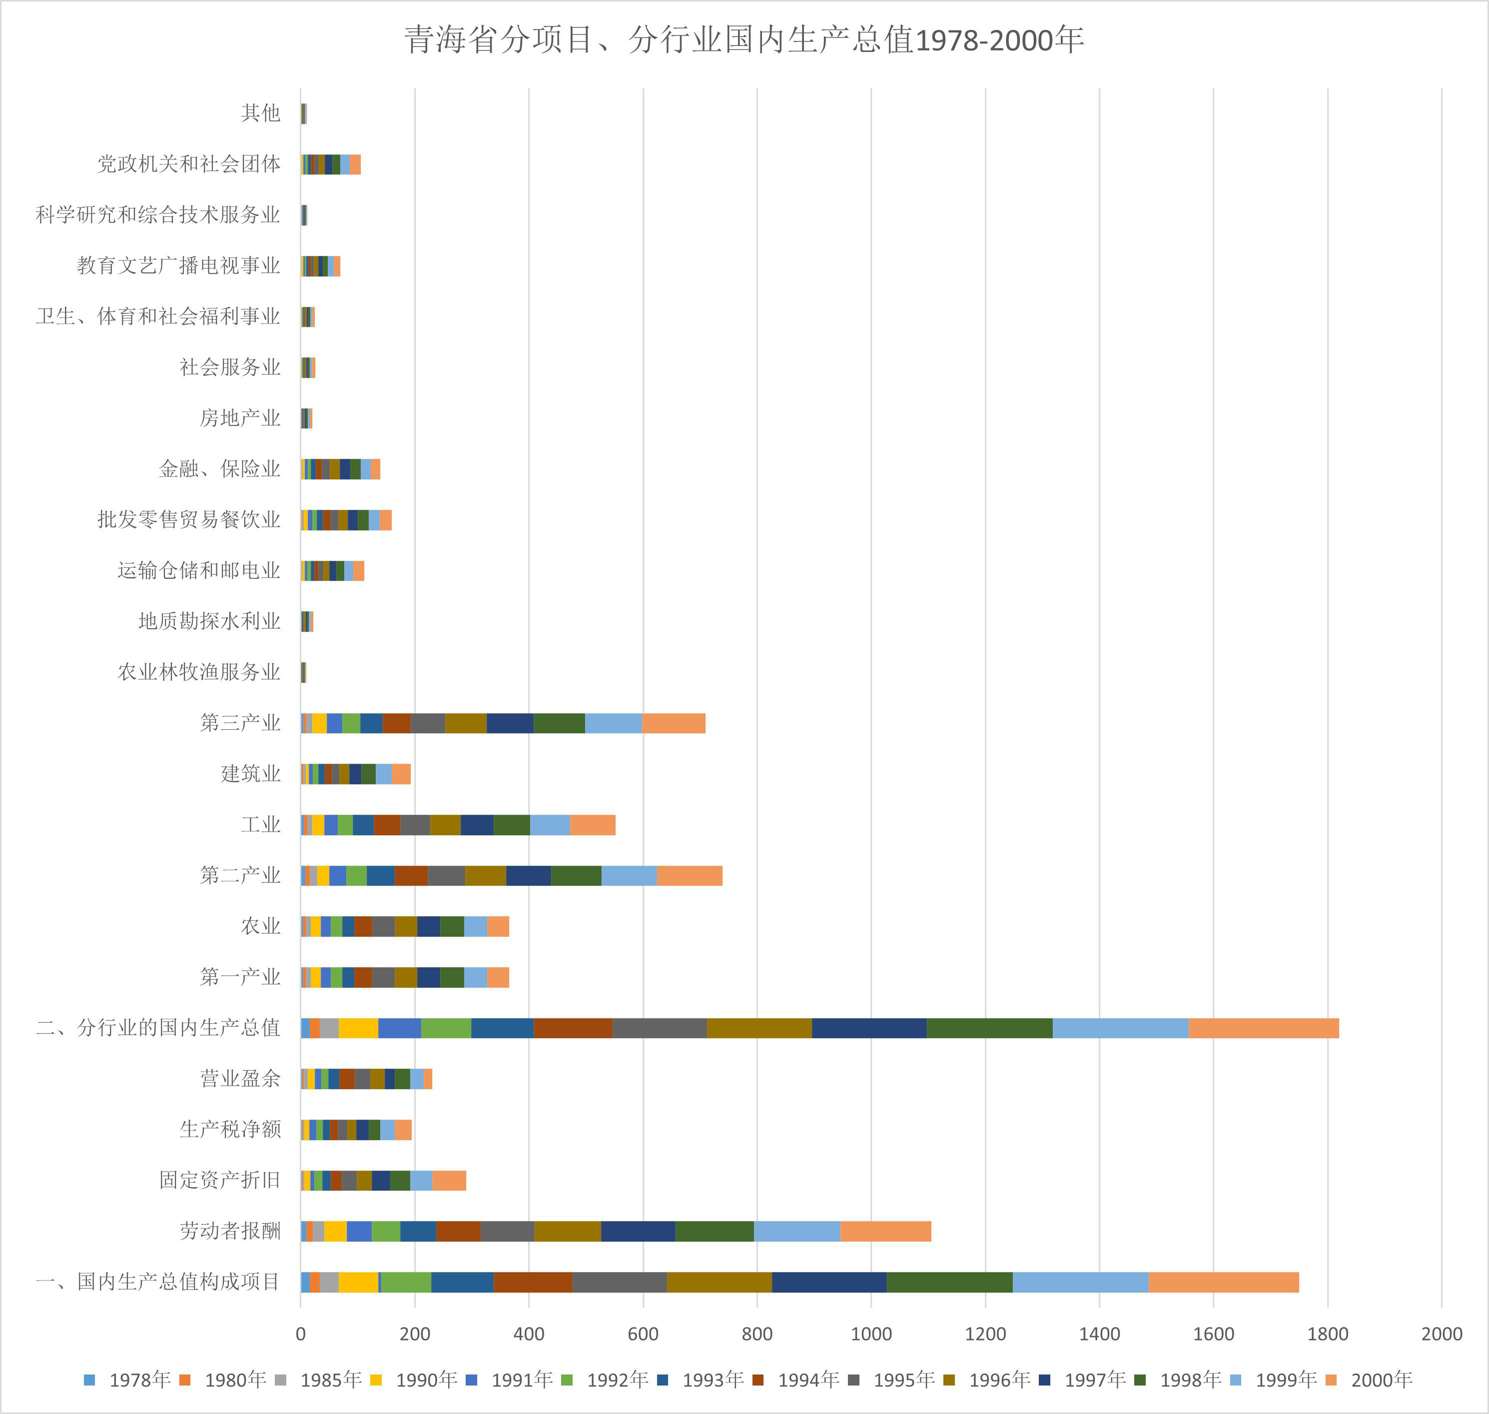 GDP of Qinghai Province by project and industry (1978-2000)